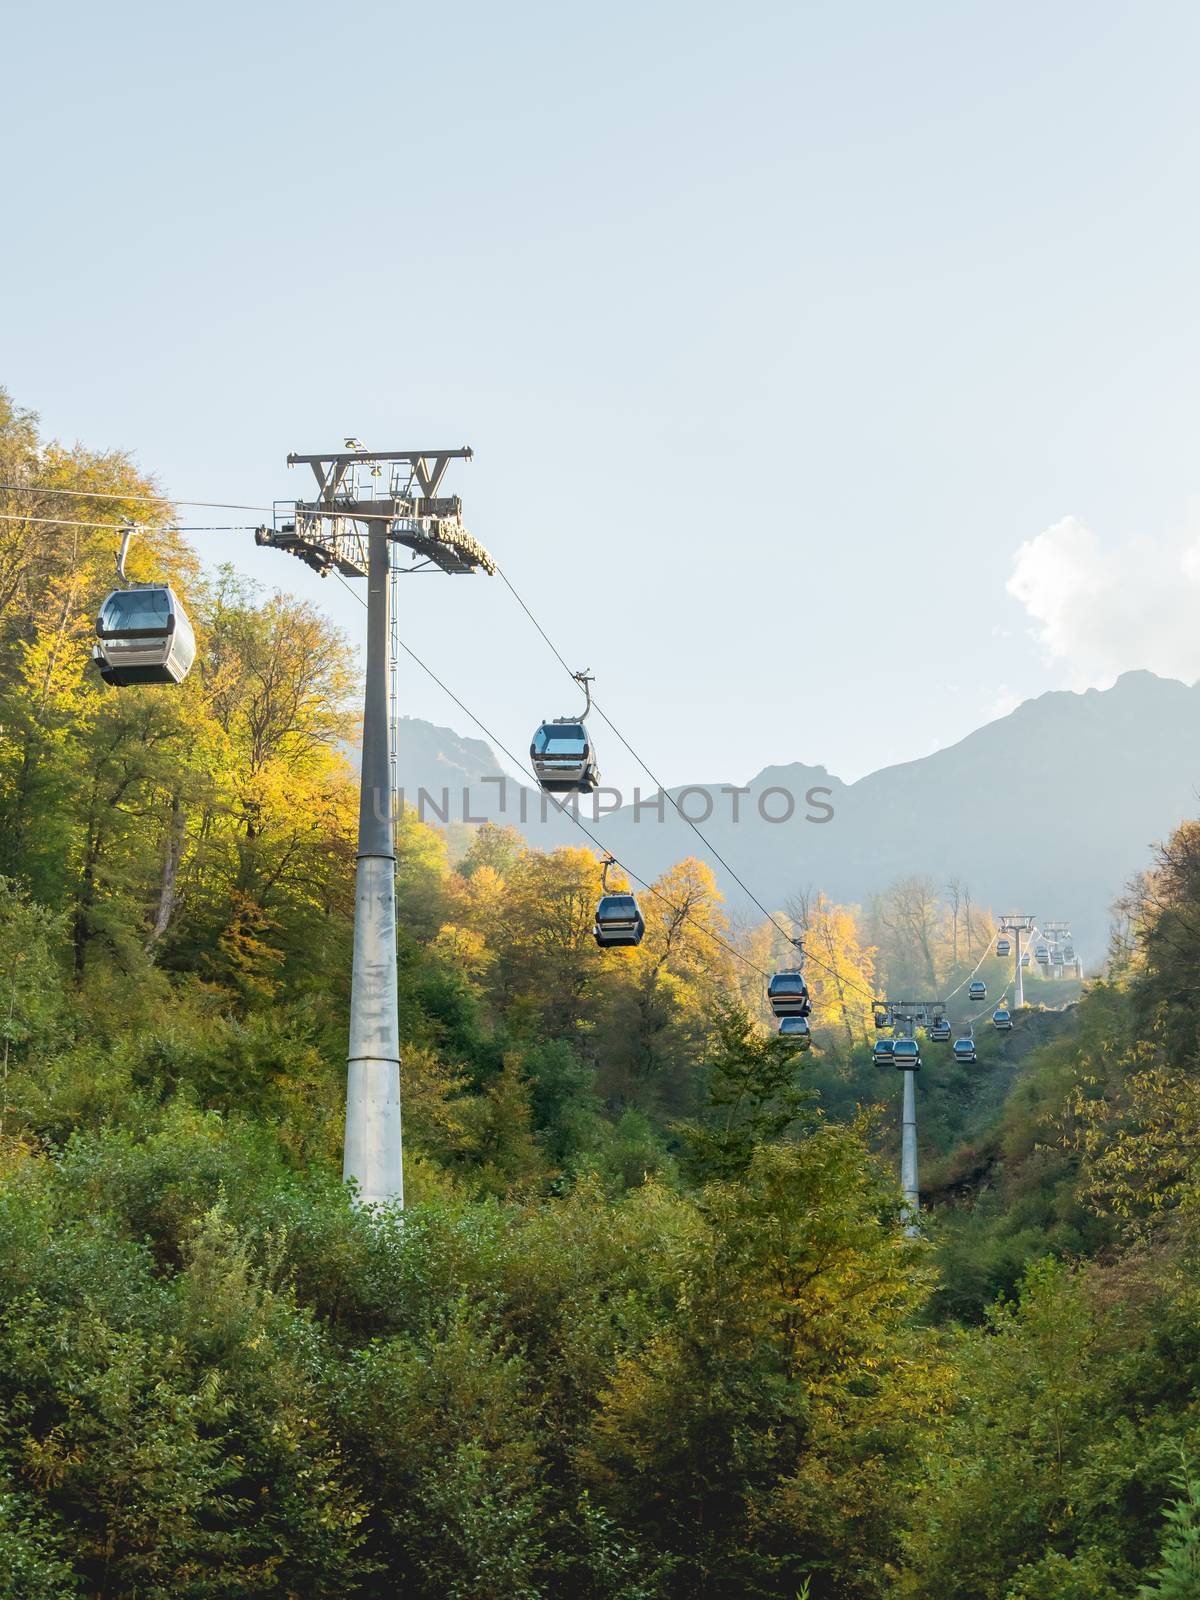 Passenger cabins move along cables of funicular. Cable road at Rosa Khutor Alpine Ski Resort. Sochi, Russia.